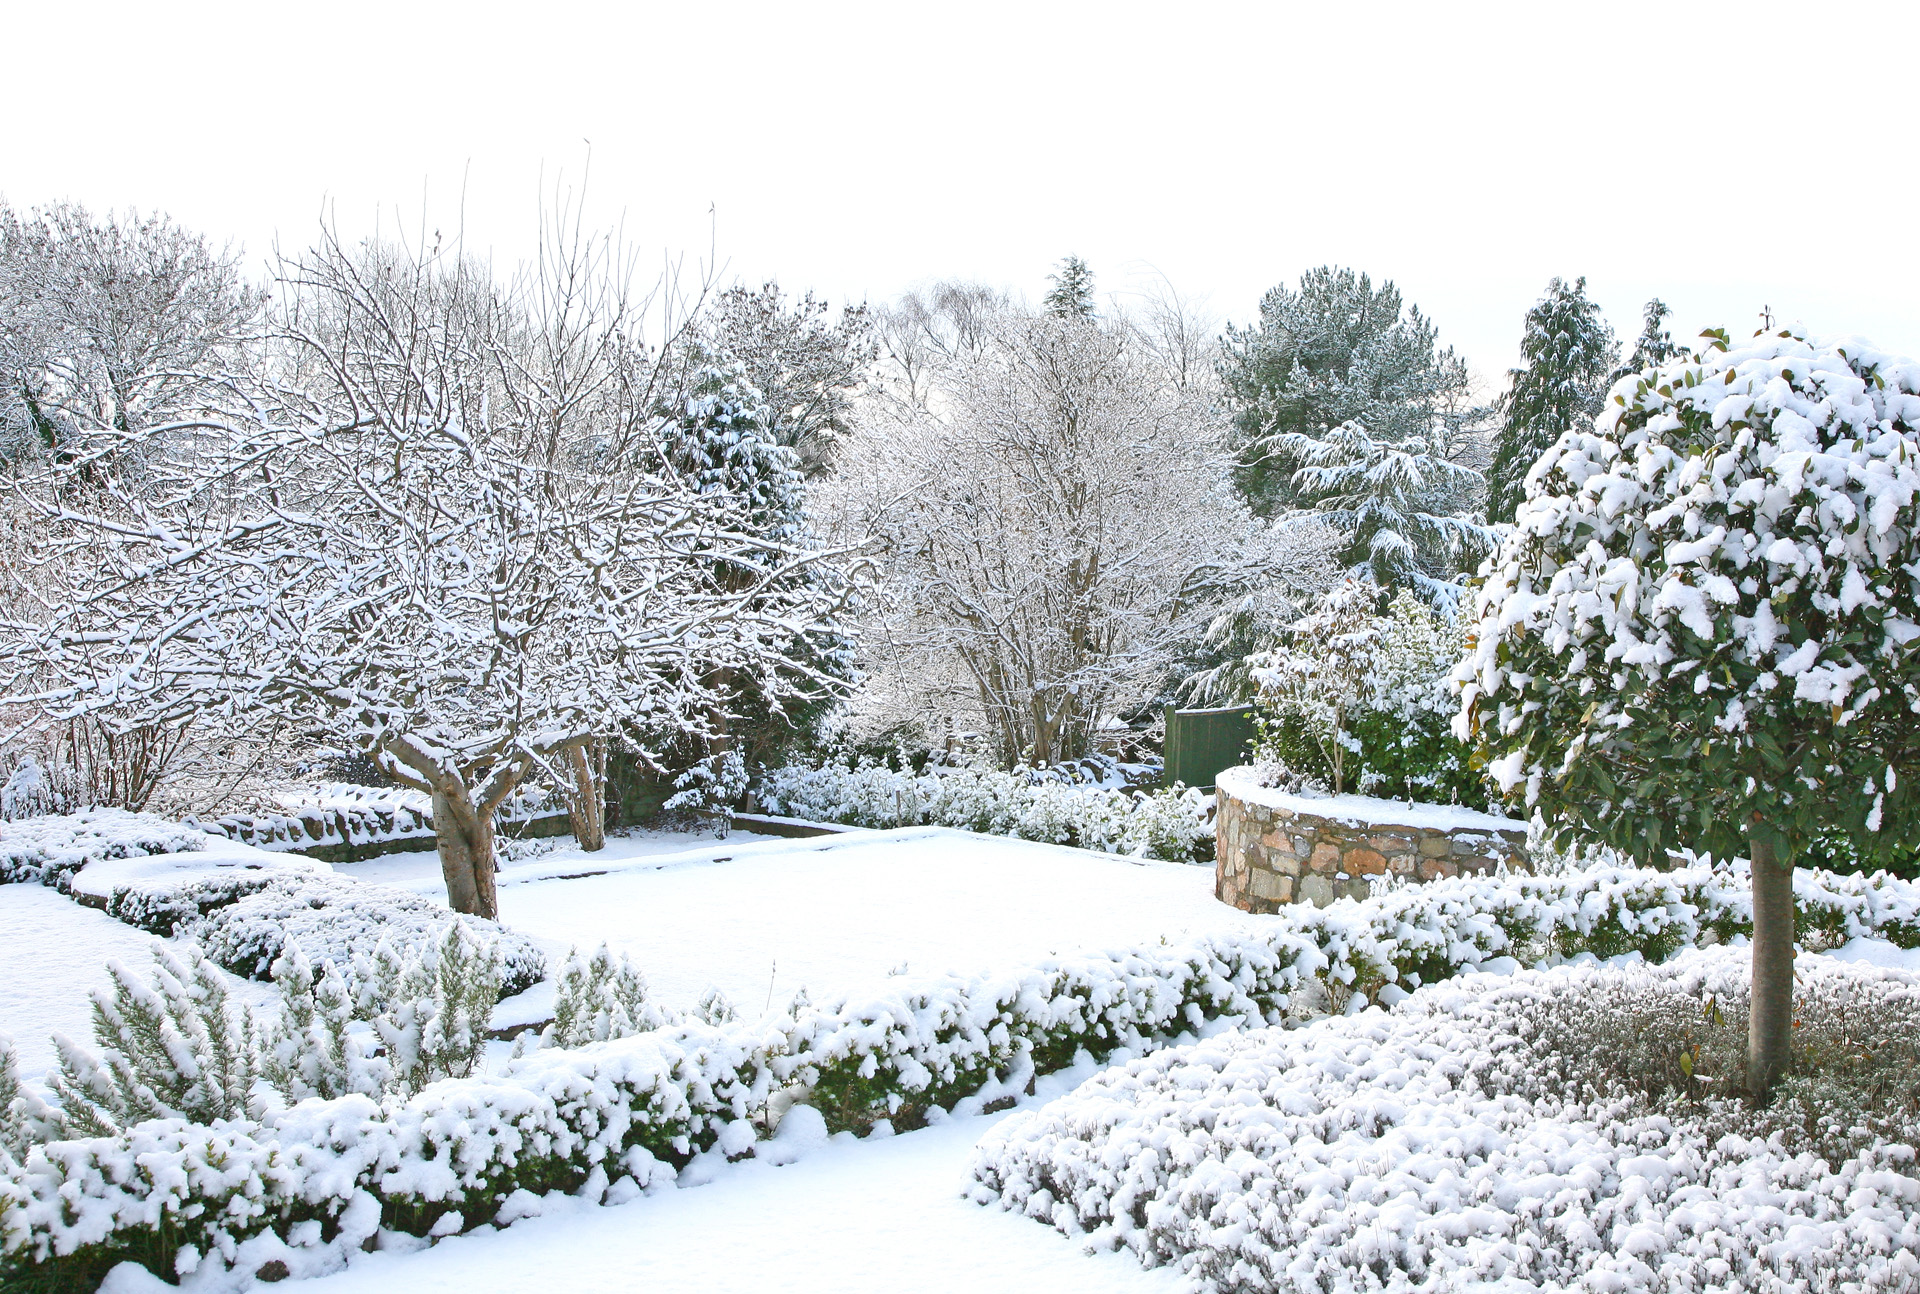 A snow-covered garden in winter